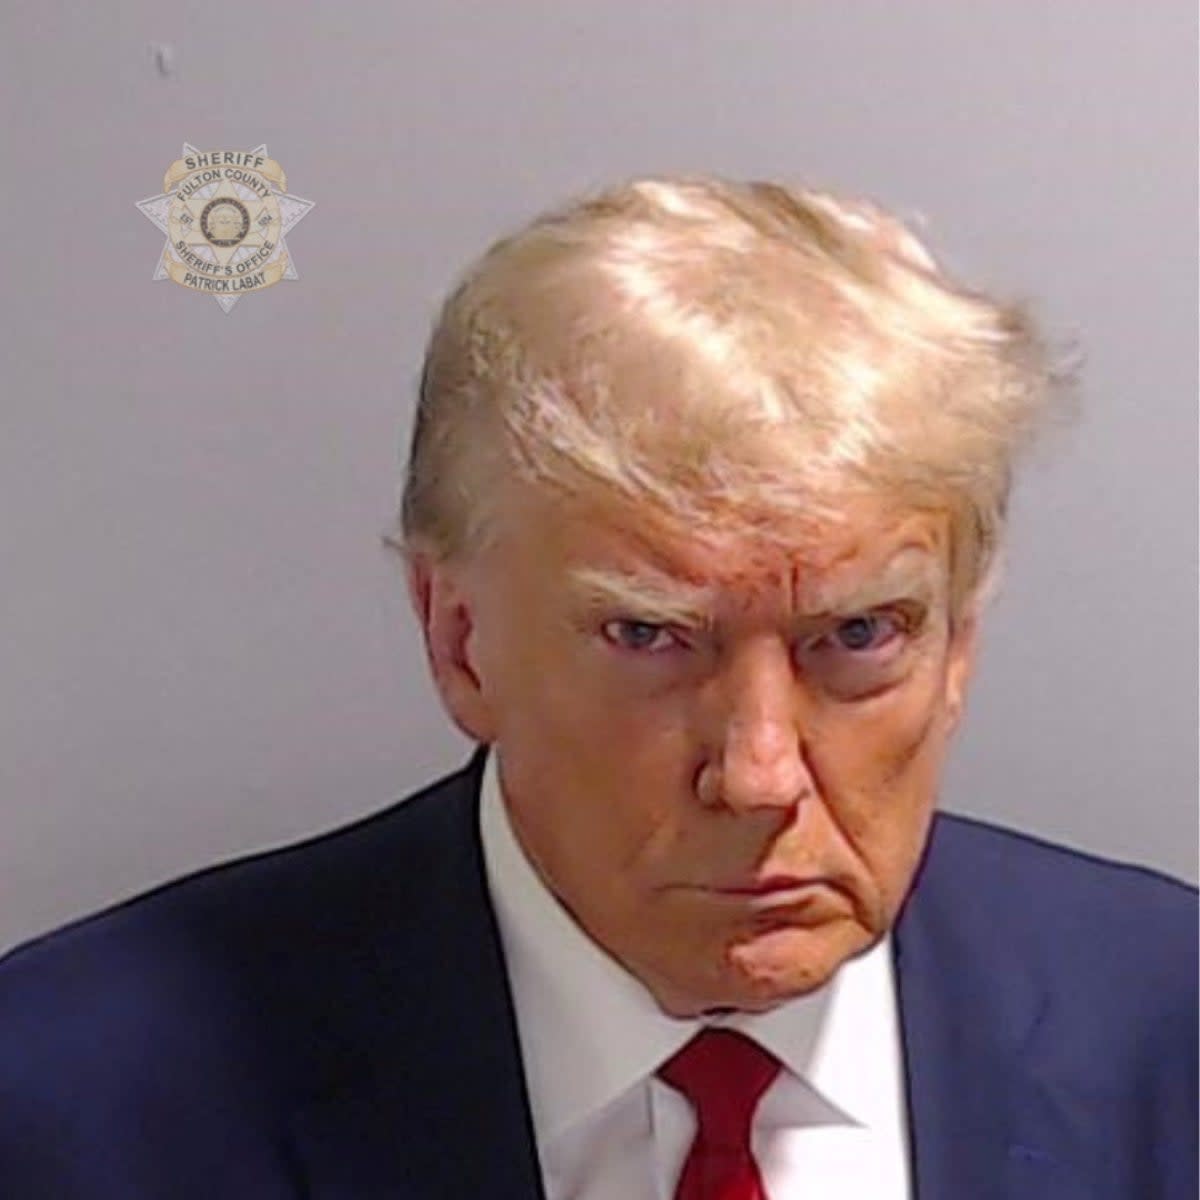 Former President Donald Trump is shown in a police booking mug shot released by the Fulton County Sheriff’s Office (via REUTERS)